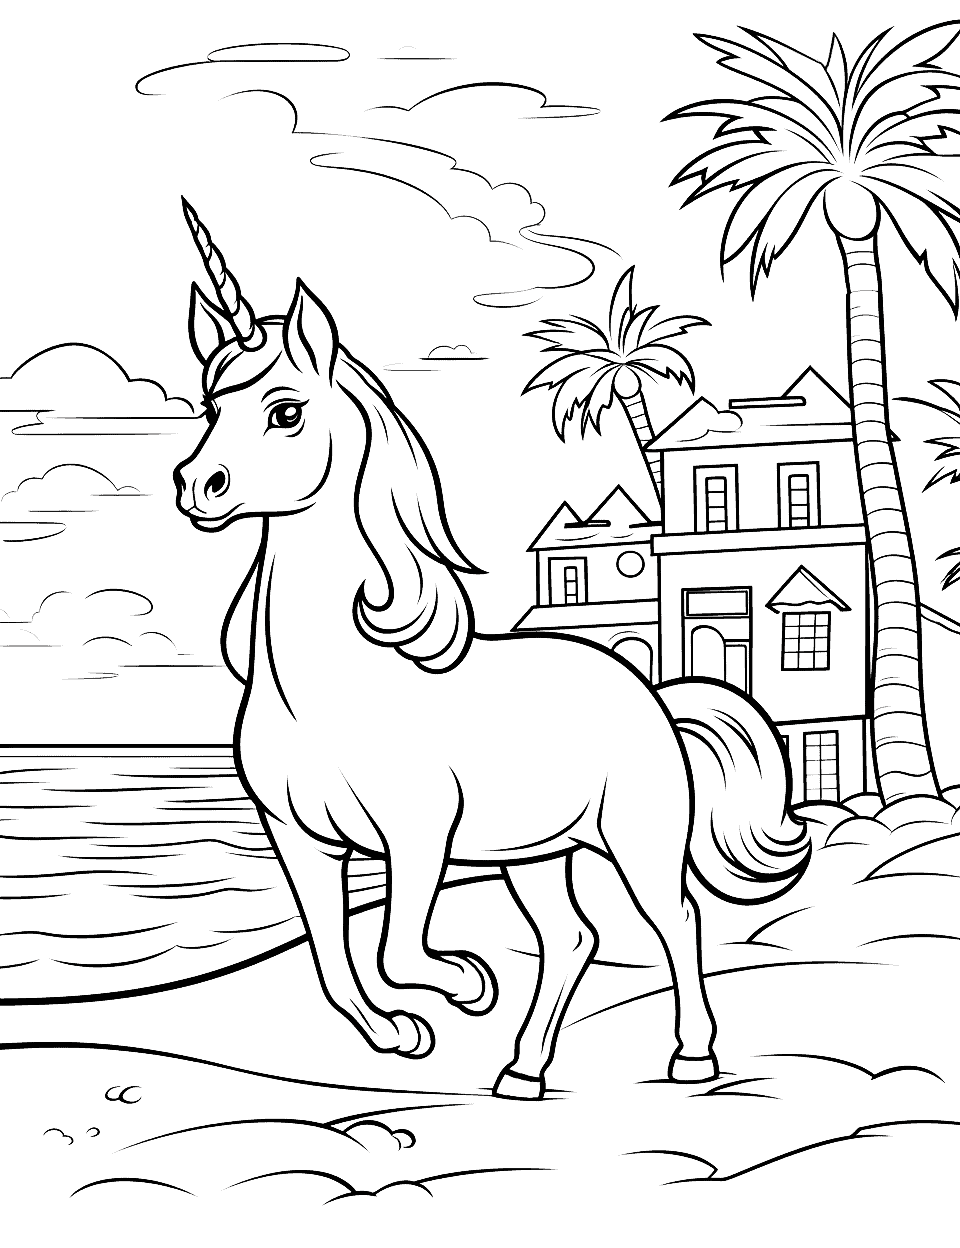 Unicorn at the Beach Coloring Page - A summer-inspired coloring page with a unicorn building sandcastles on the beach, complete with the sea and palm trees.